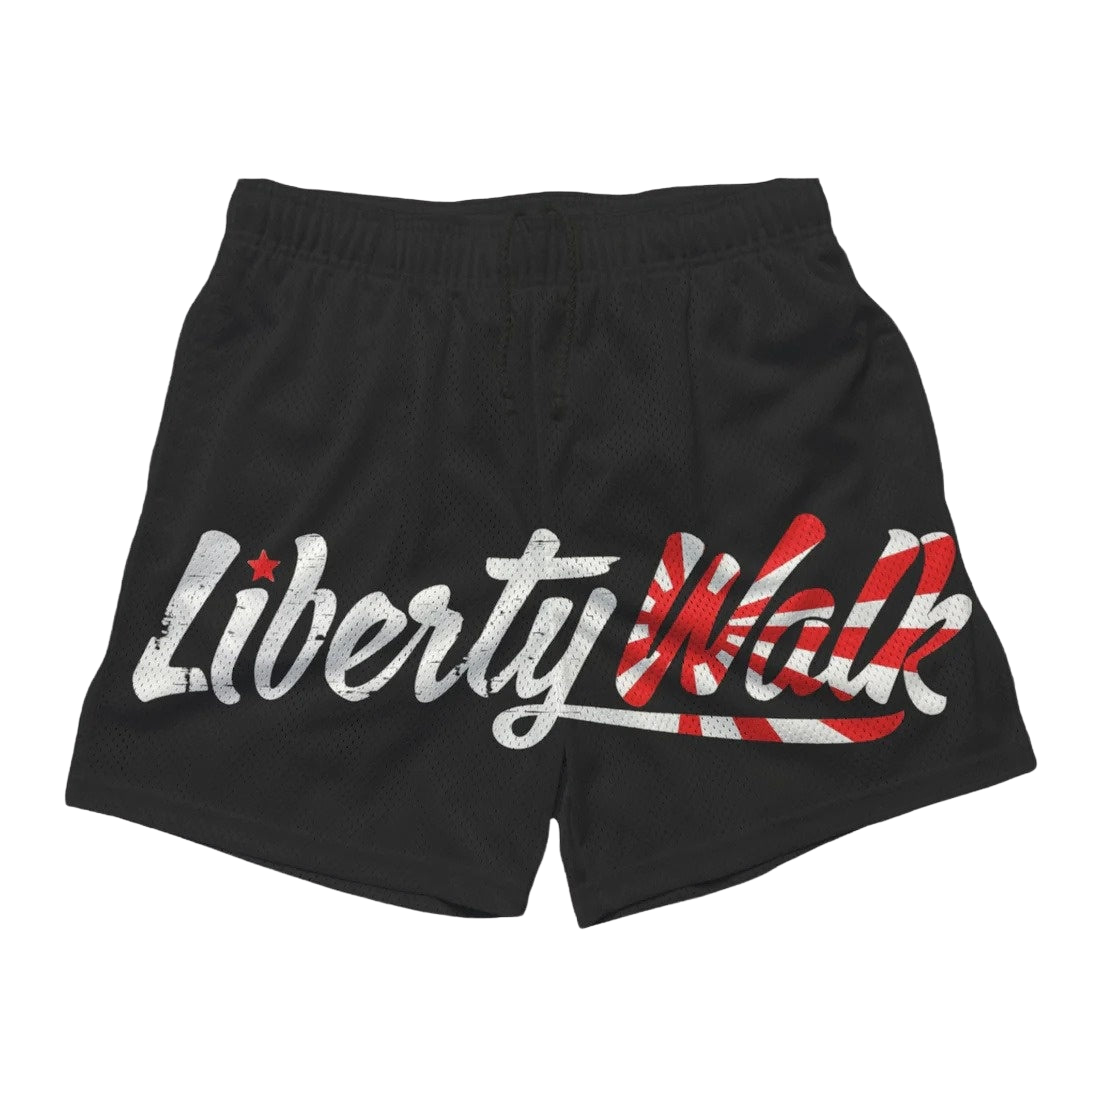 a black shorts with the word liberty on it